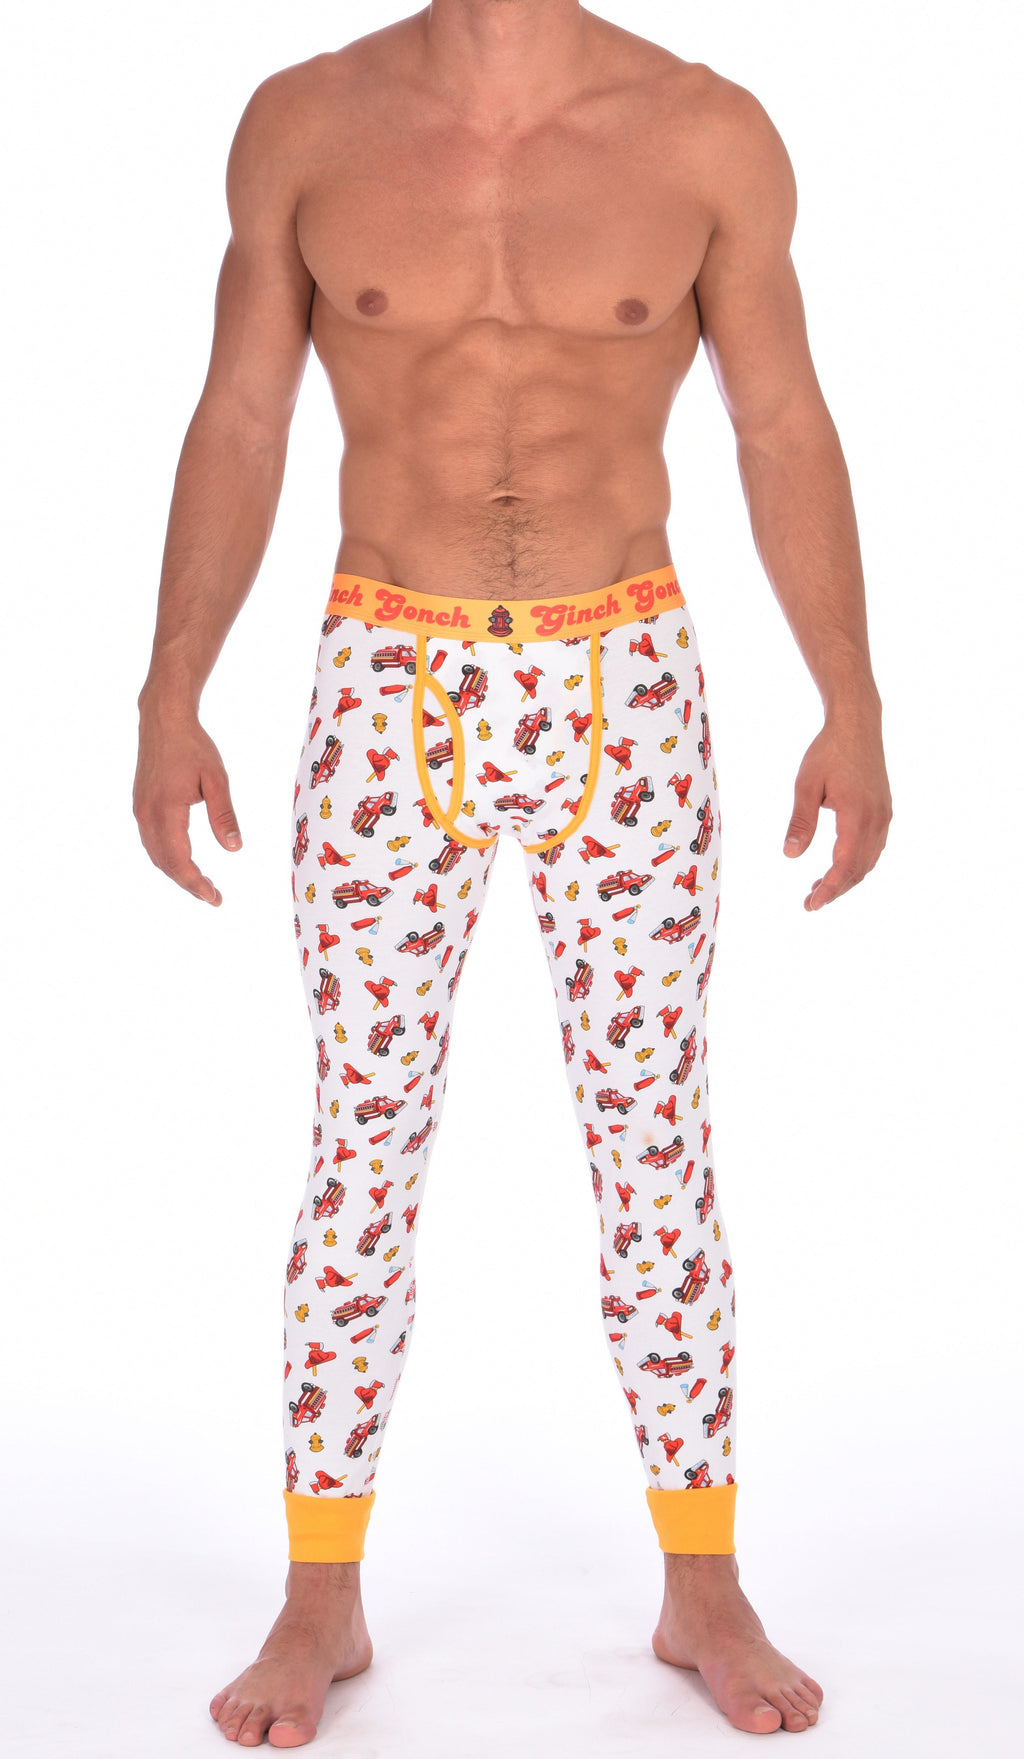 Ginch Gonch GG Fire Fighters long johns leggings mens underwear white fabric with fire engines hats and hydrants, yellow trim and yellow printed waistband front 